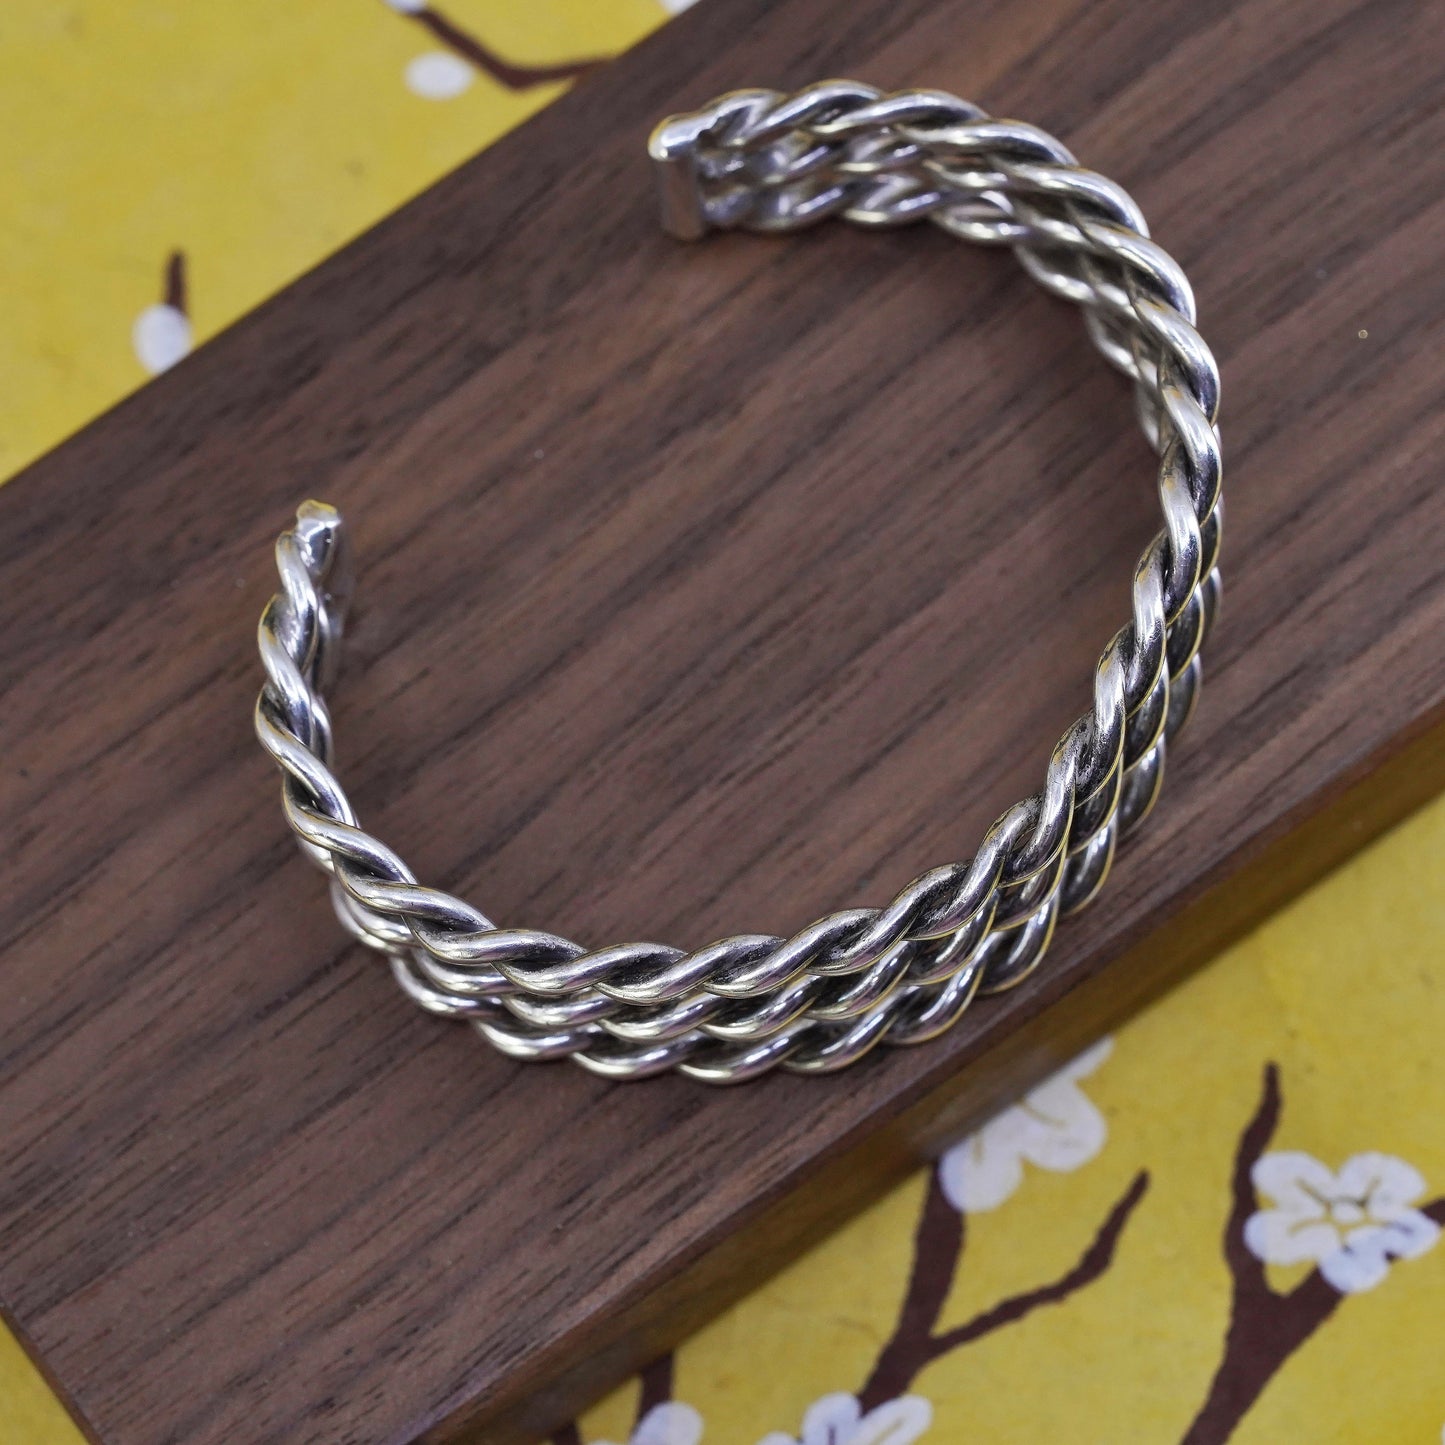 6.5”, Vintage Sterling silver handmade bracelet, 925 wide twisted cable cuff